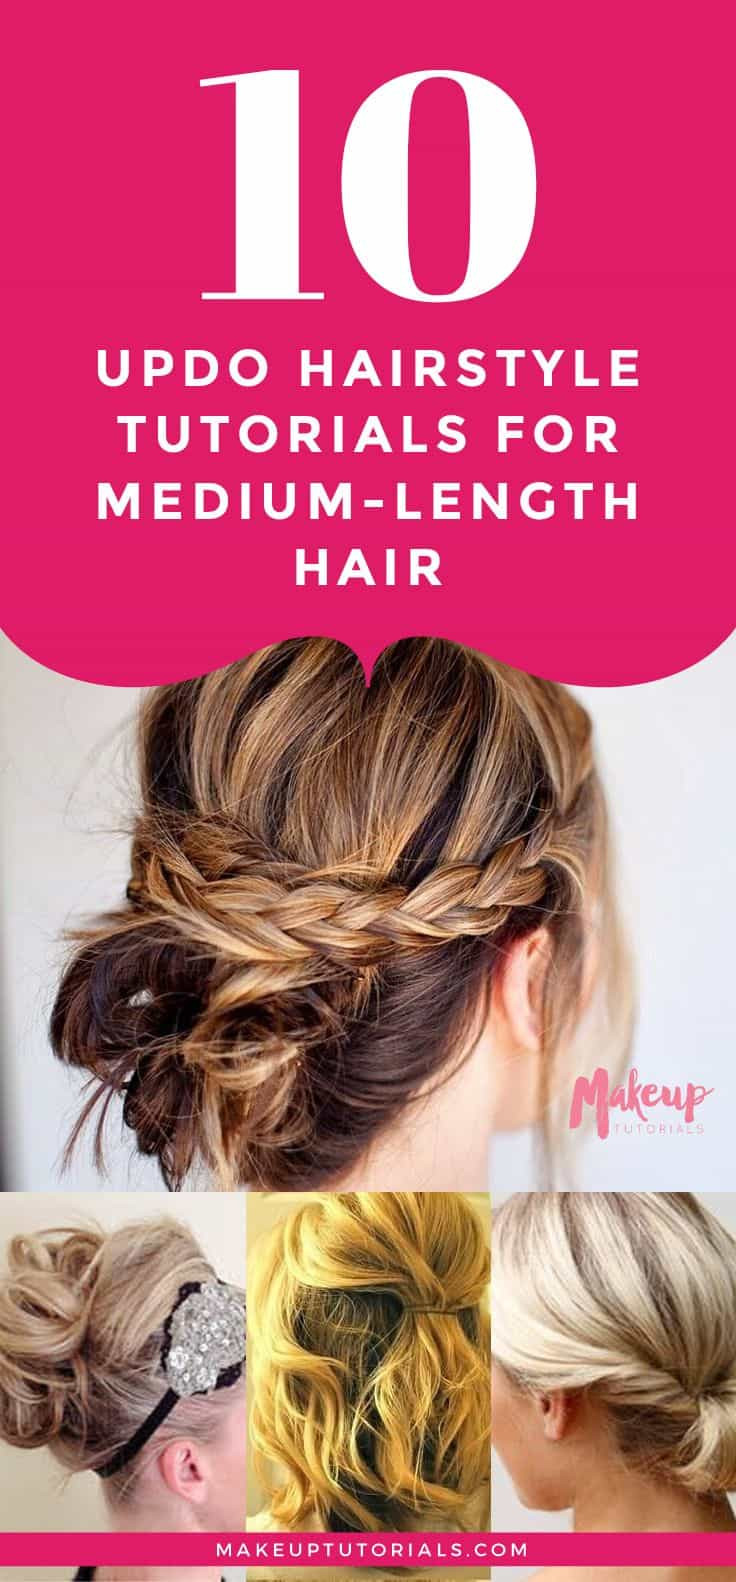 Hairstyles For Medium Hair Updos
 10 Hairstyle Tutorials For Your Next GNO